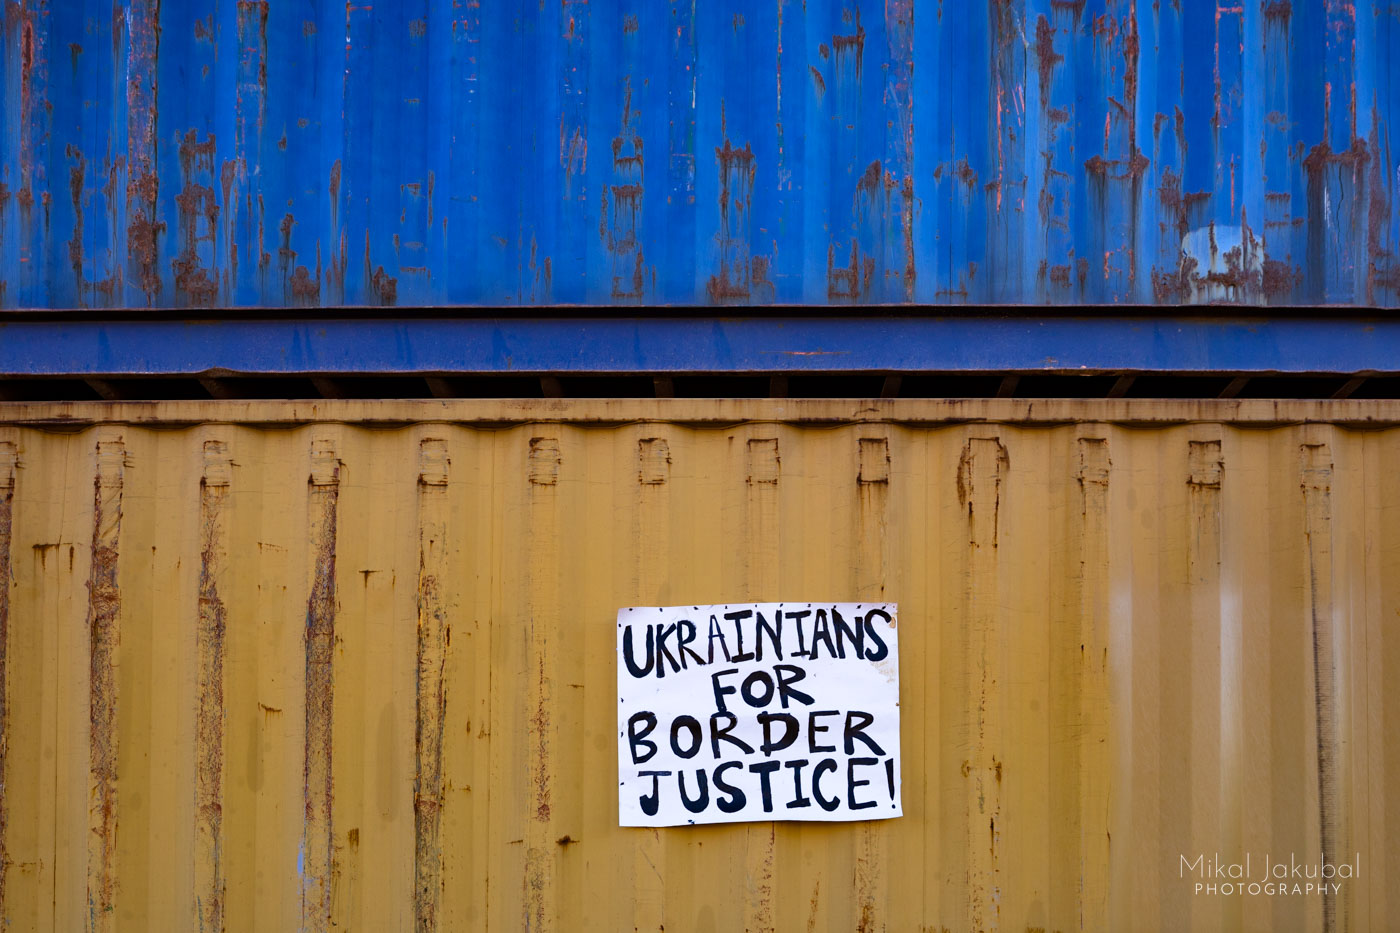 A close up view of a blue shipping container stacked on top of a yellow one, mimicking the colors of the Ukrainian flag. On the yellow container is a hand-lettered sign that says "Ukrainians for border justice!"